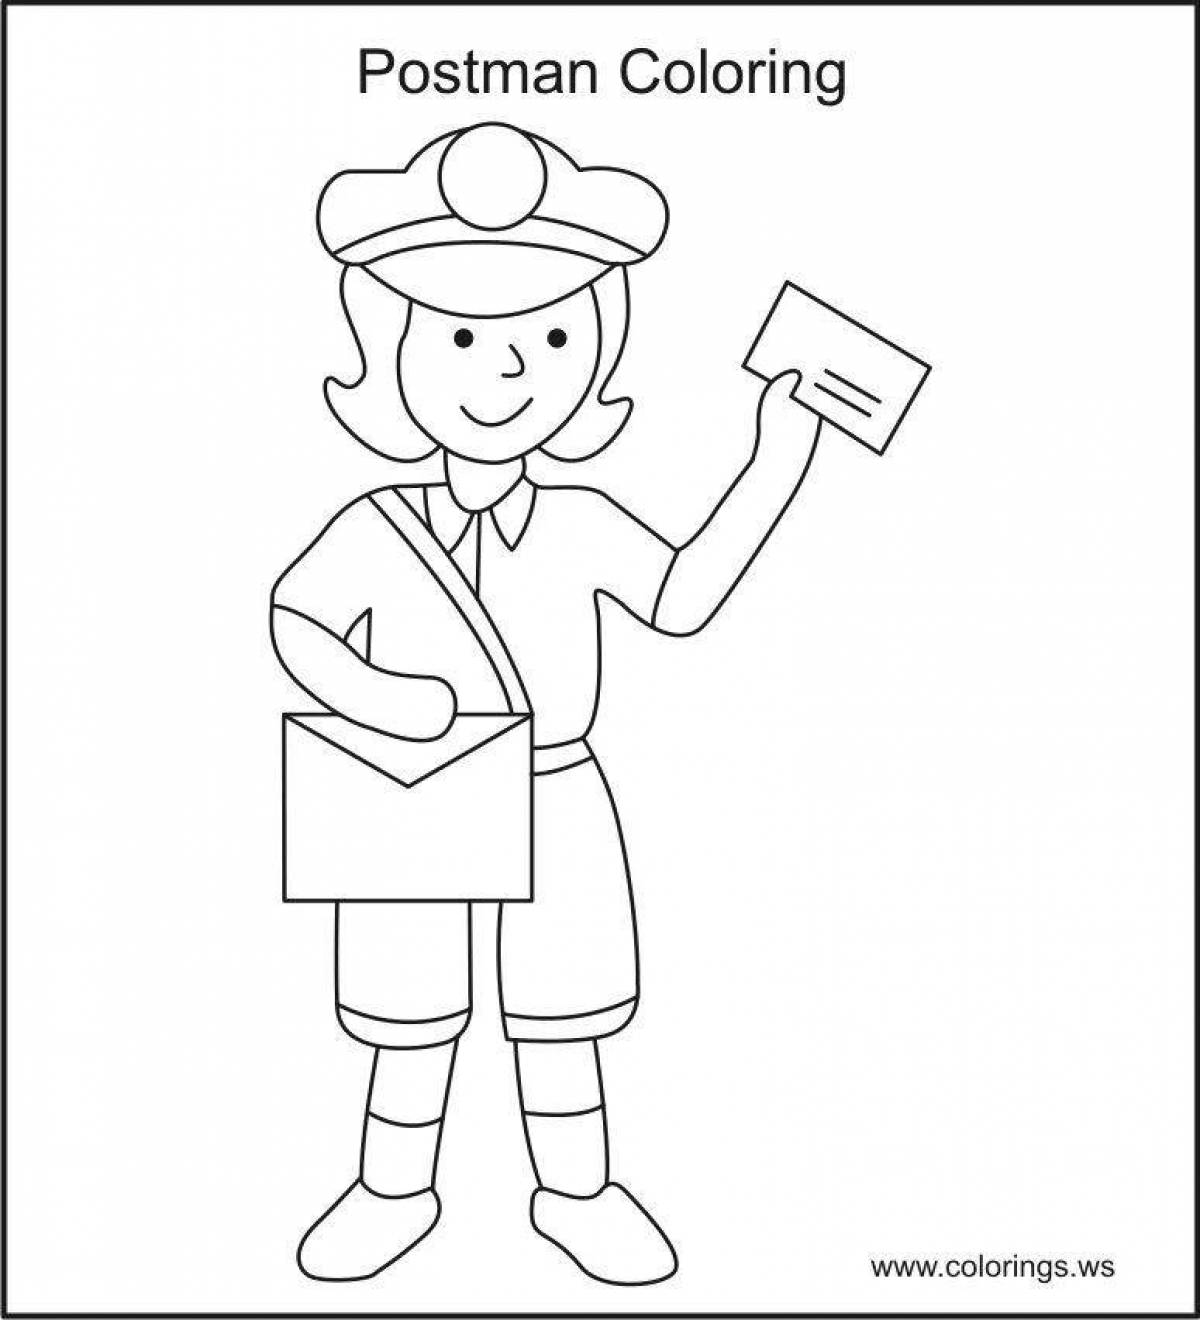 Coloring book cheerful astronaut